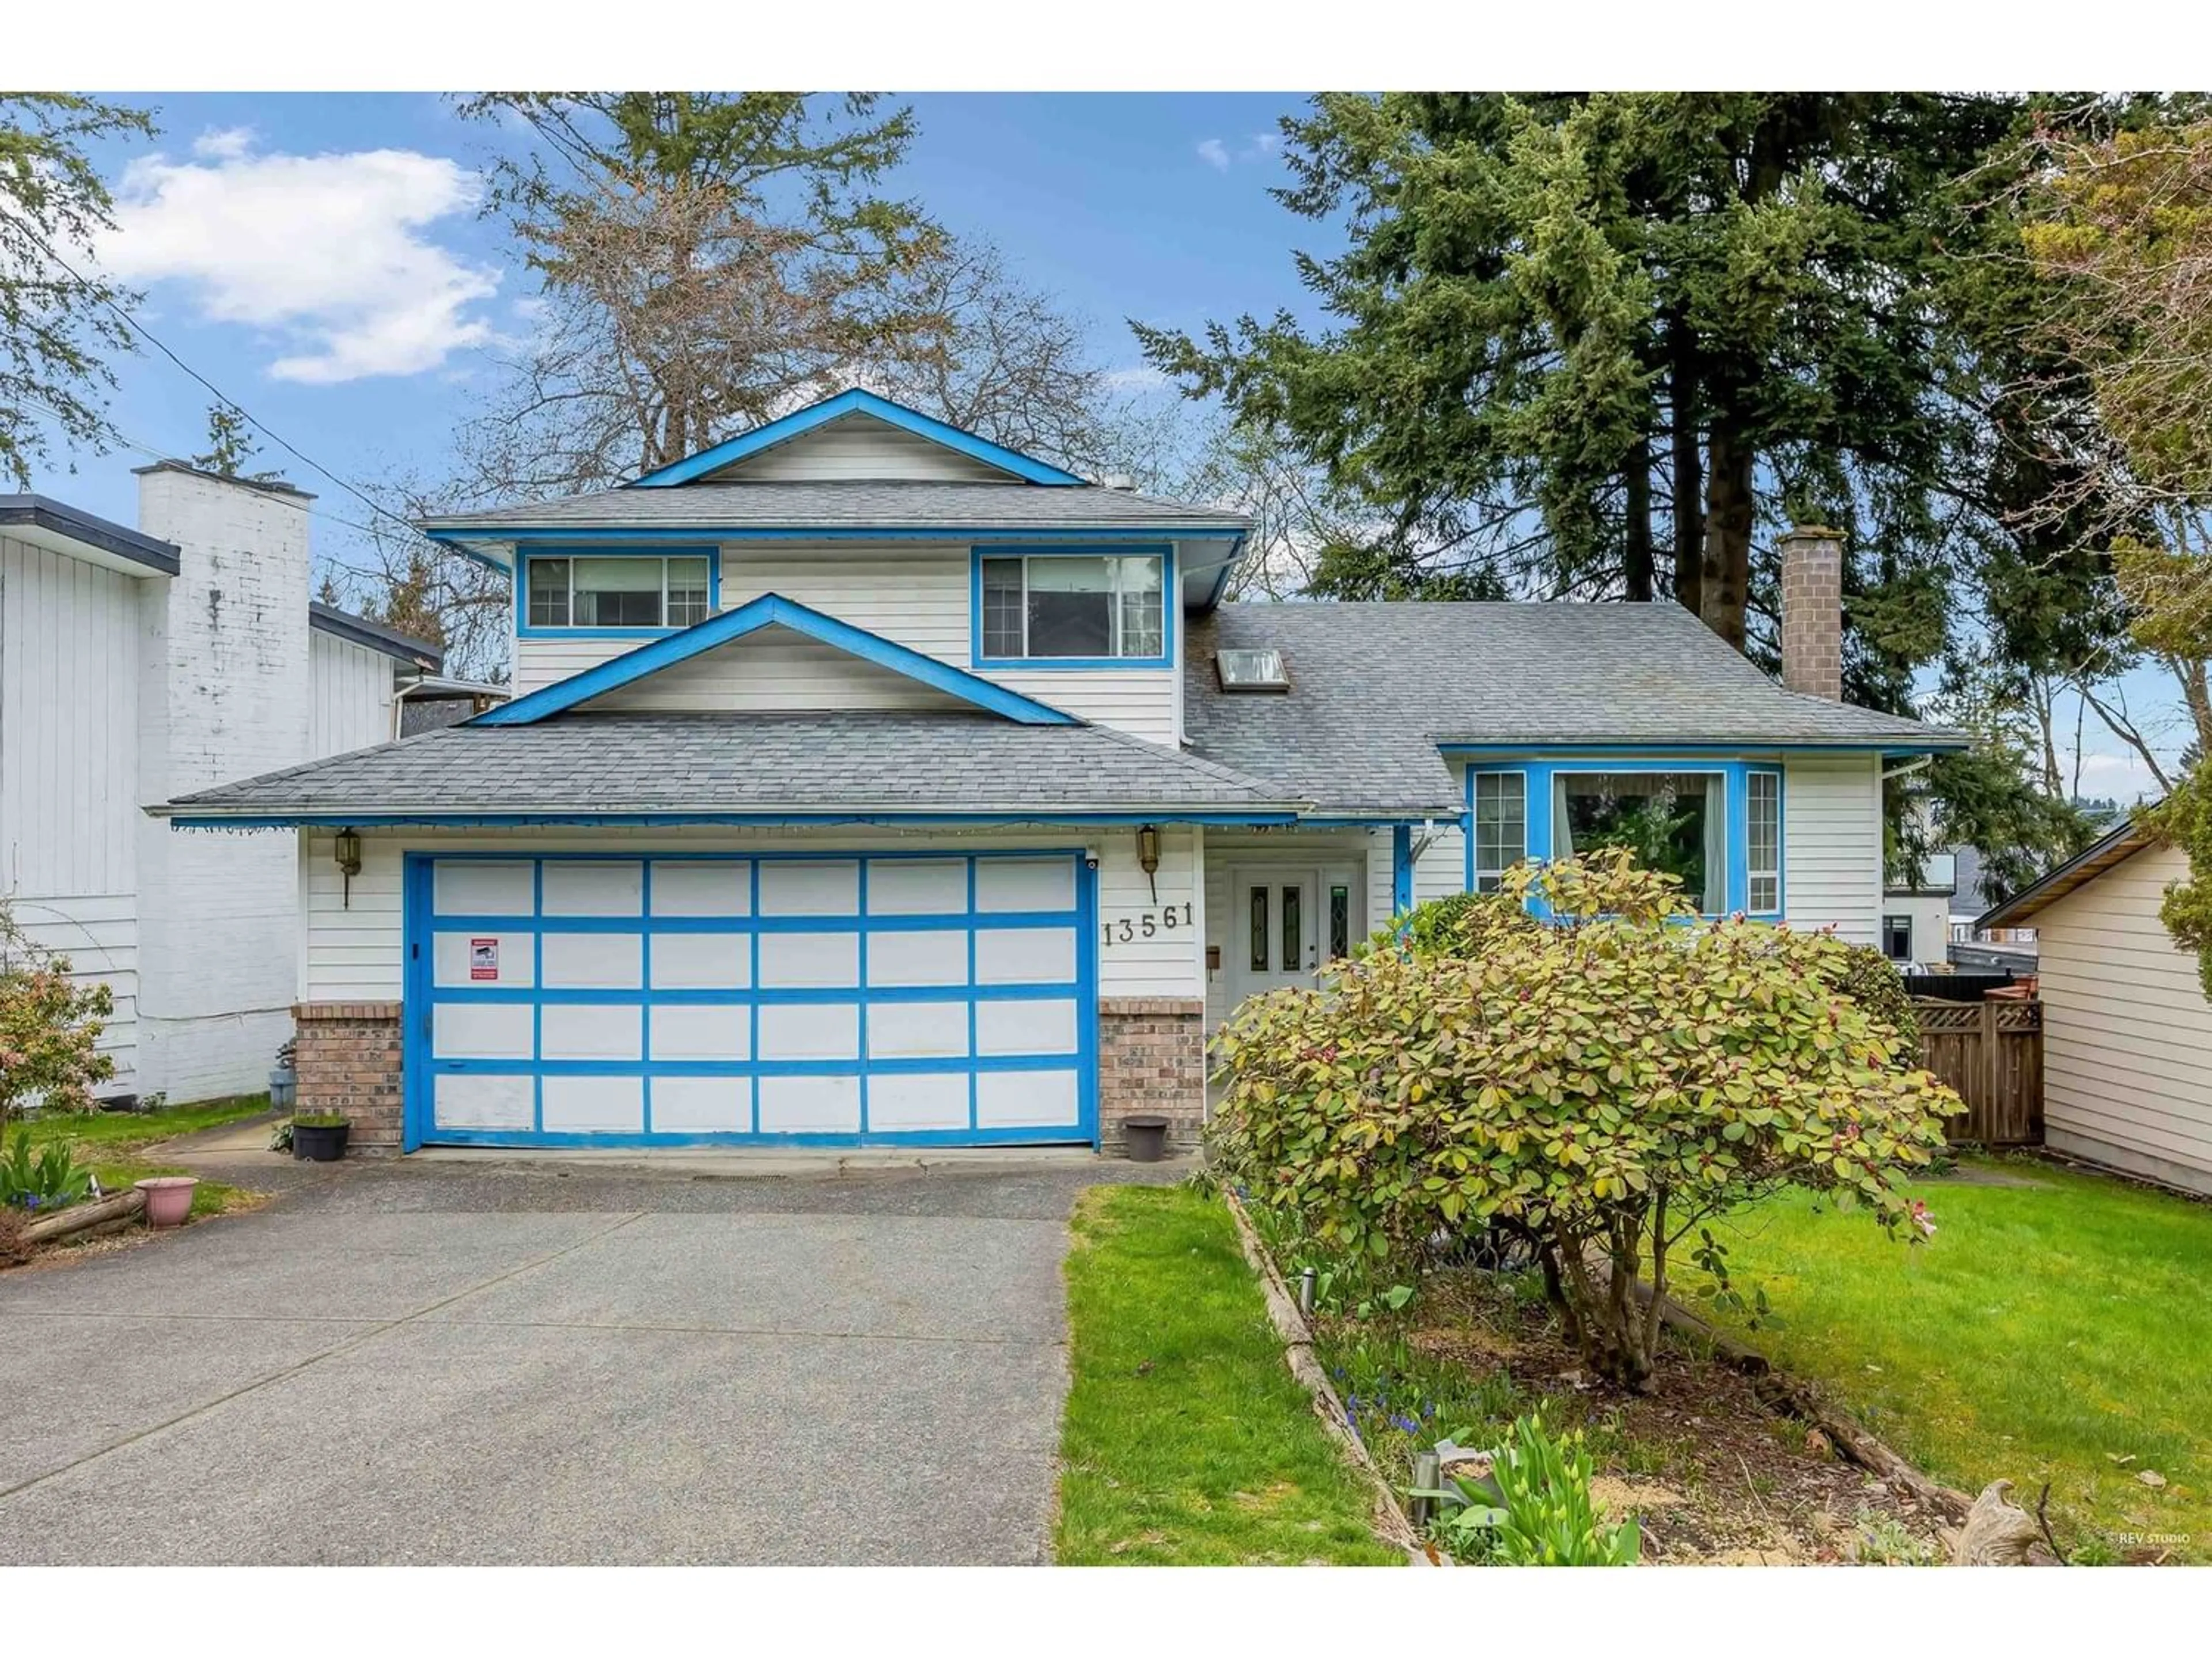 Frontside or backside of a home for 13561 61A AVENUE, Surrey British Columbia V3X2J9